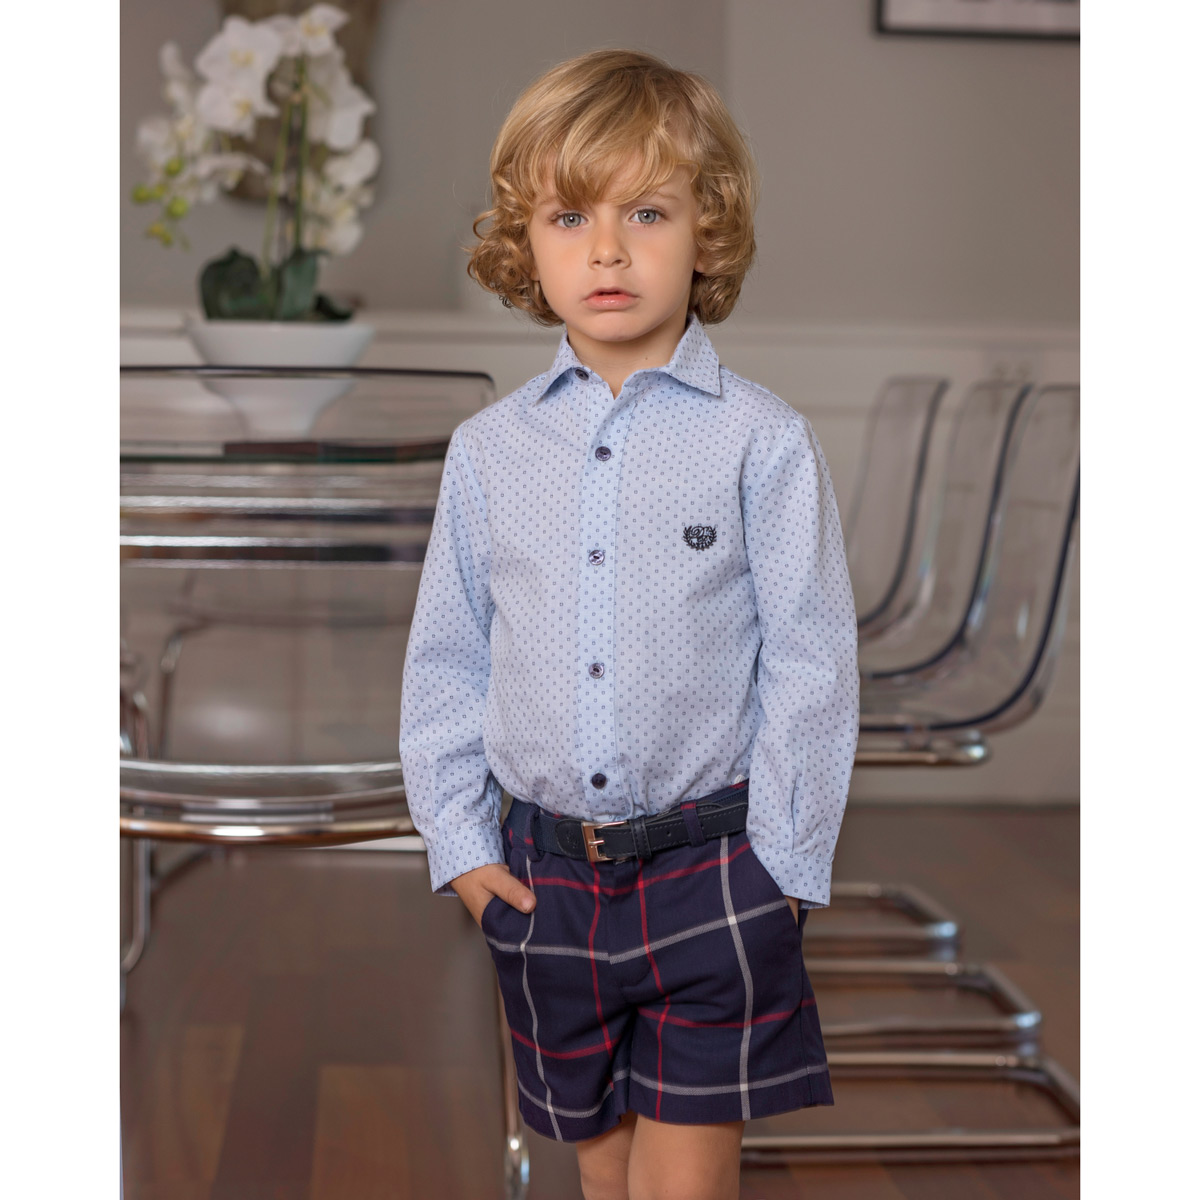 Dolce Petit 2019 Autumn Winter Boys Blue Shirt Navy Check Shorts With Belt  Outfit Style 26-2213-23